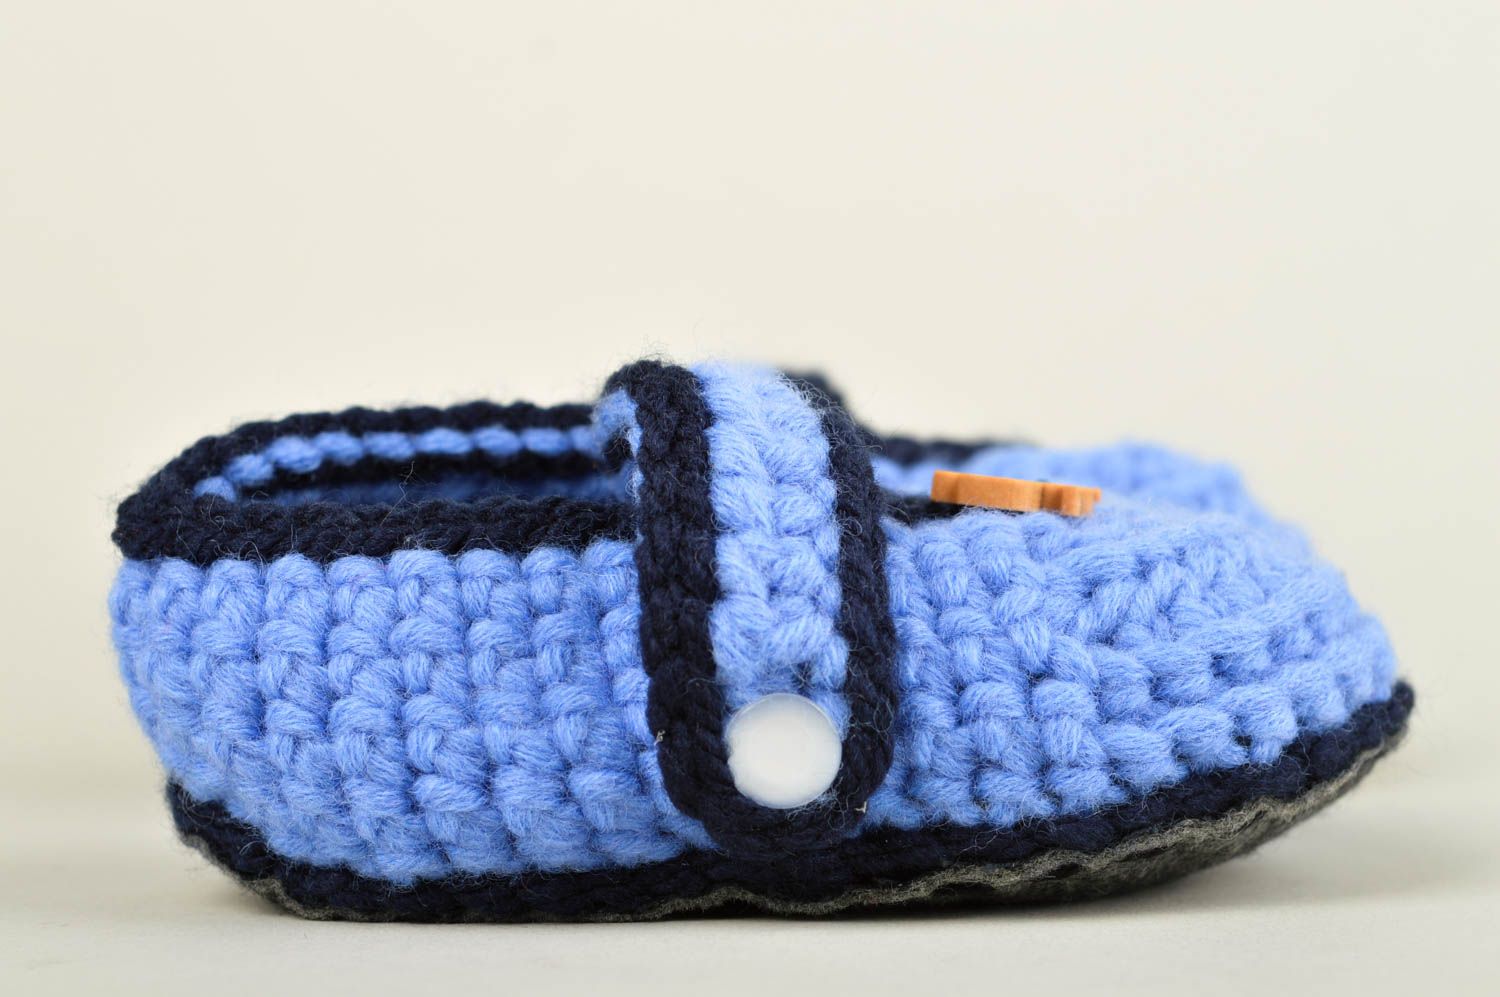 Handmade crocheted baby bootees designer blue baby bootees shoes for boys photo 3